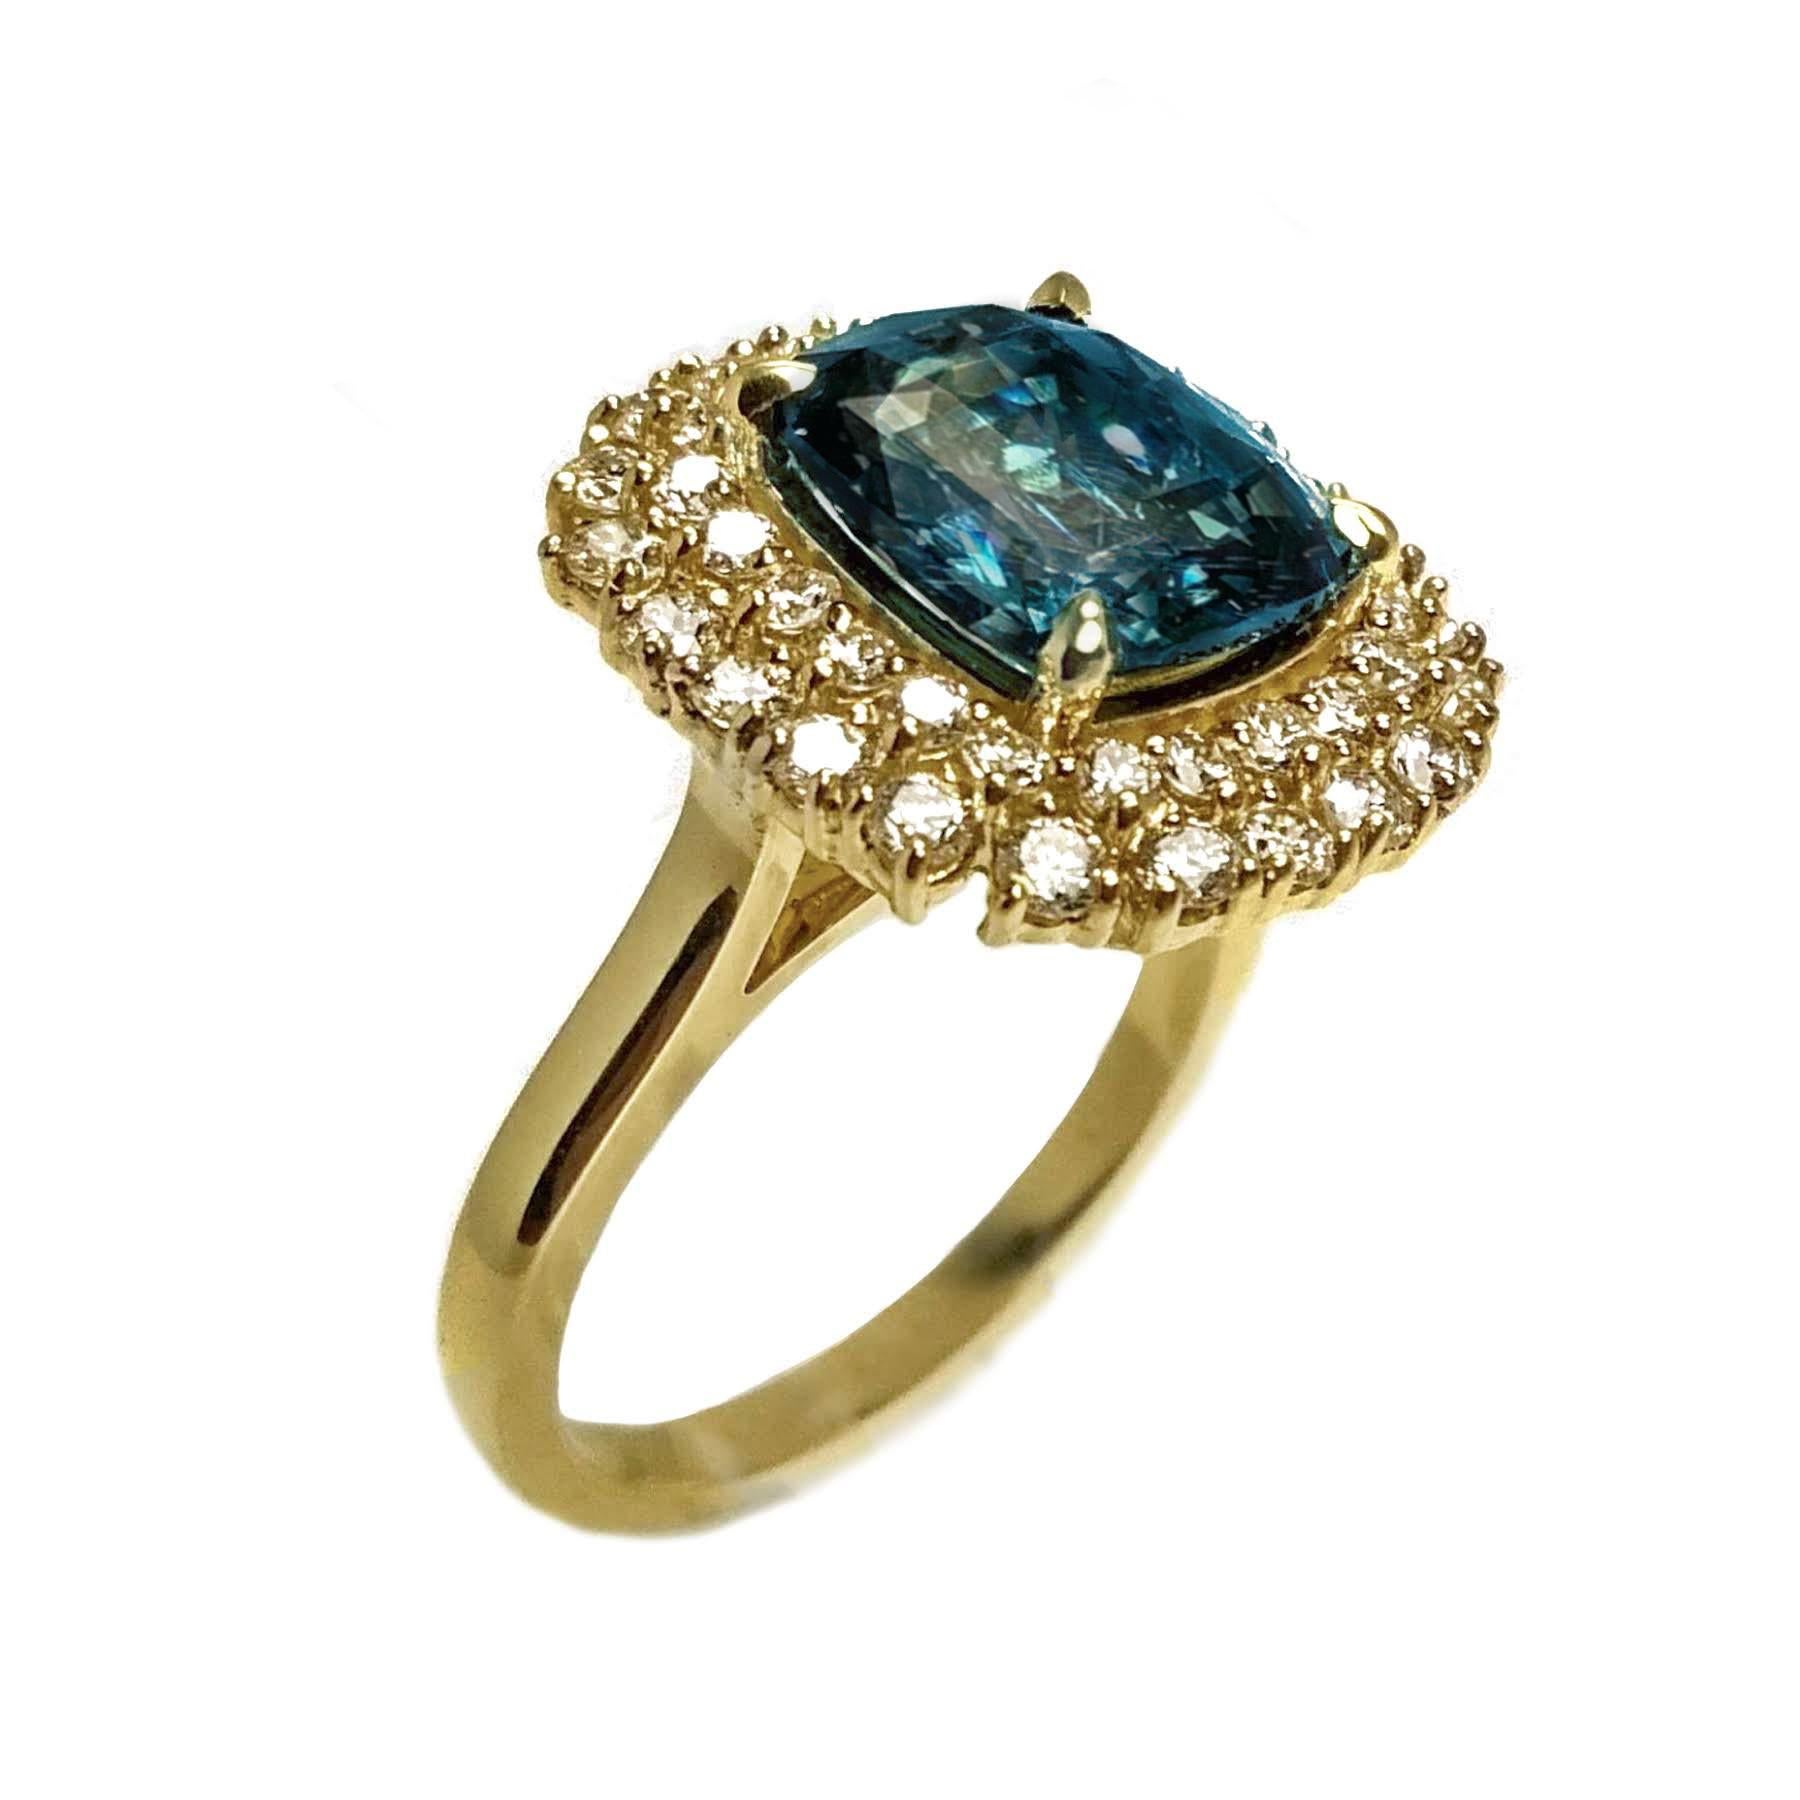 Rare, unheated greenish-blue sapphire and diamond ring. High luster, cushion modified brilliant, unheated greenish-blue 3.95 carats sapphire with GIA, encased in basket mounting, set in high profile with four knife prongs, accented with two rows of